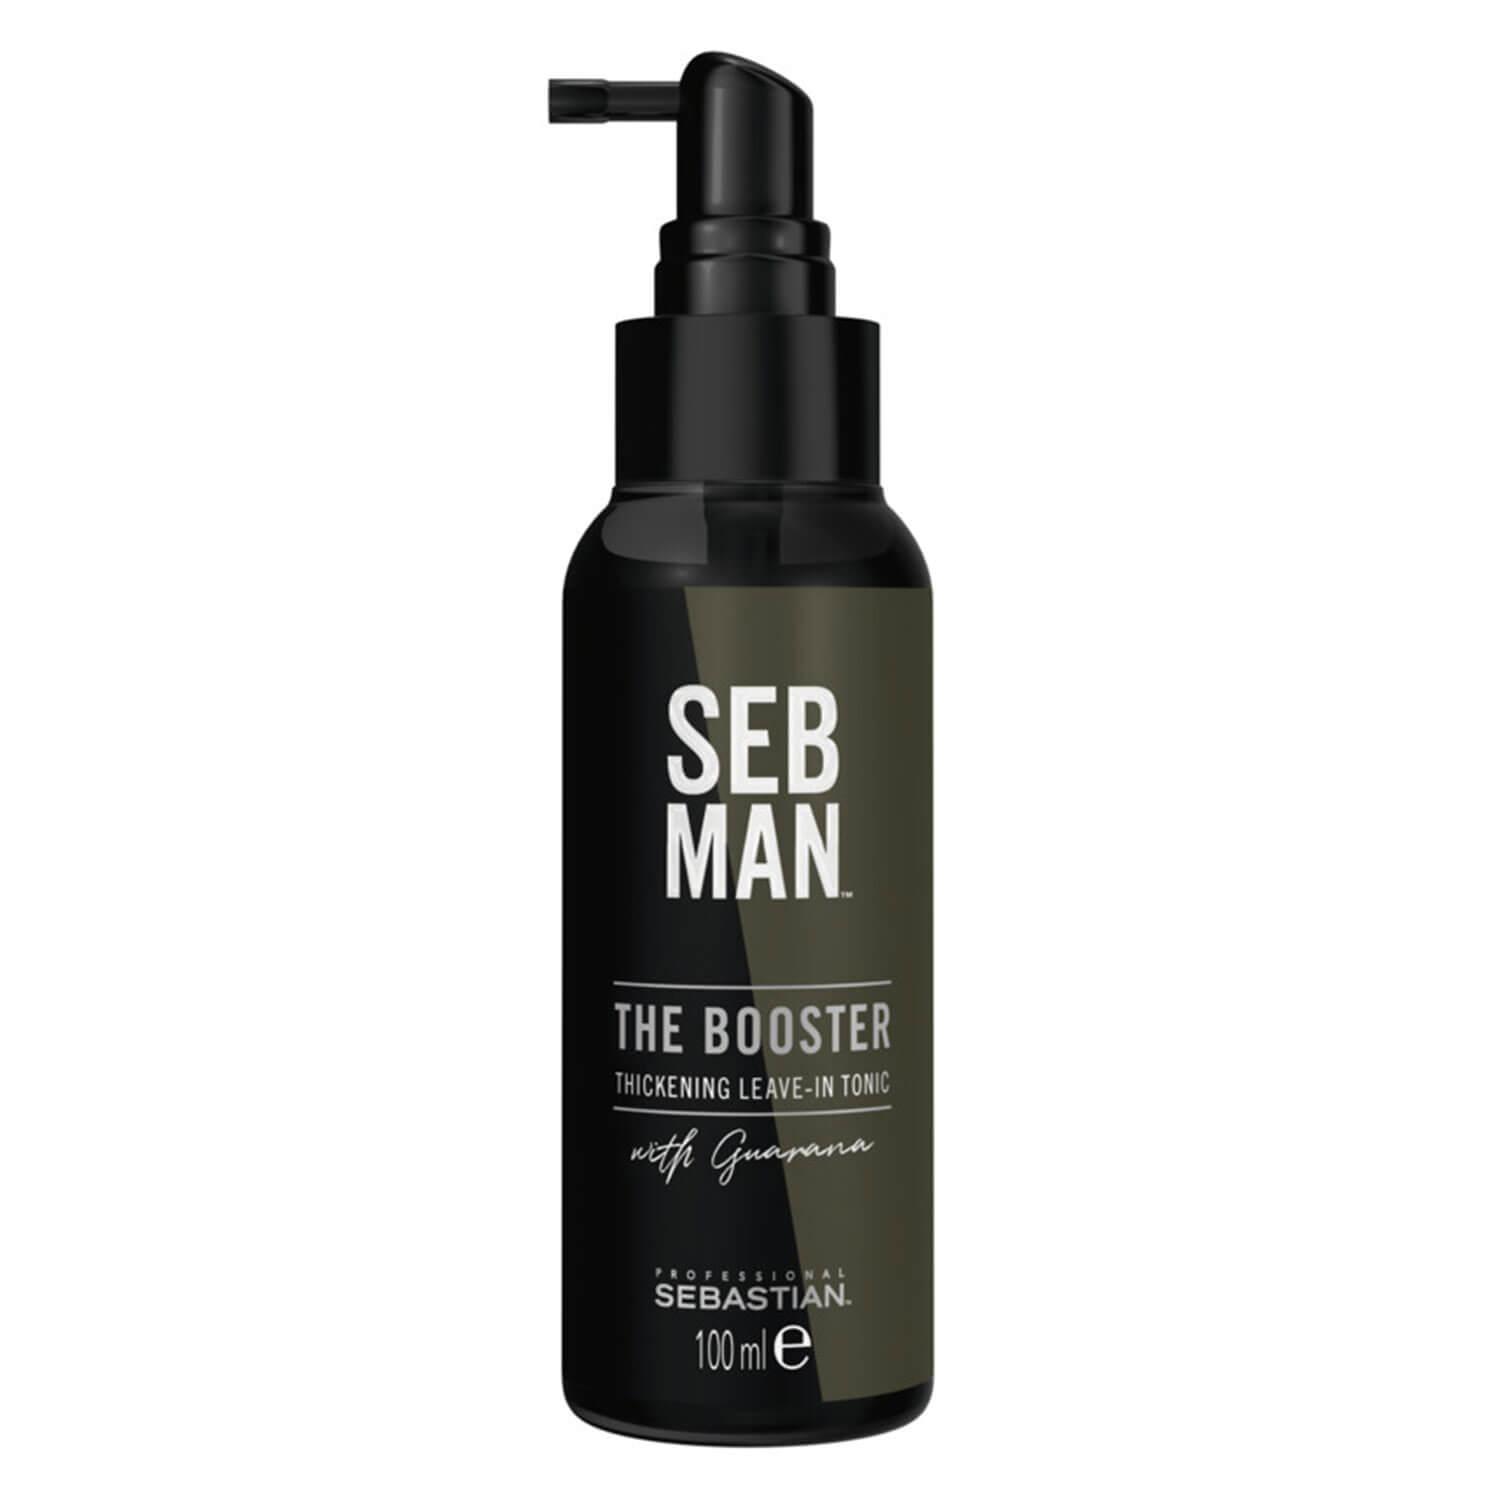 SEB MAN - The Booster Thickening Leave-in Tonic